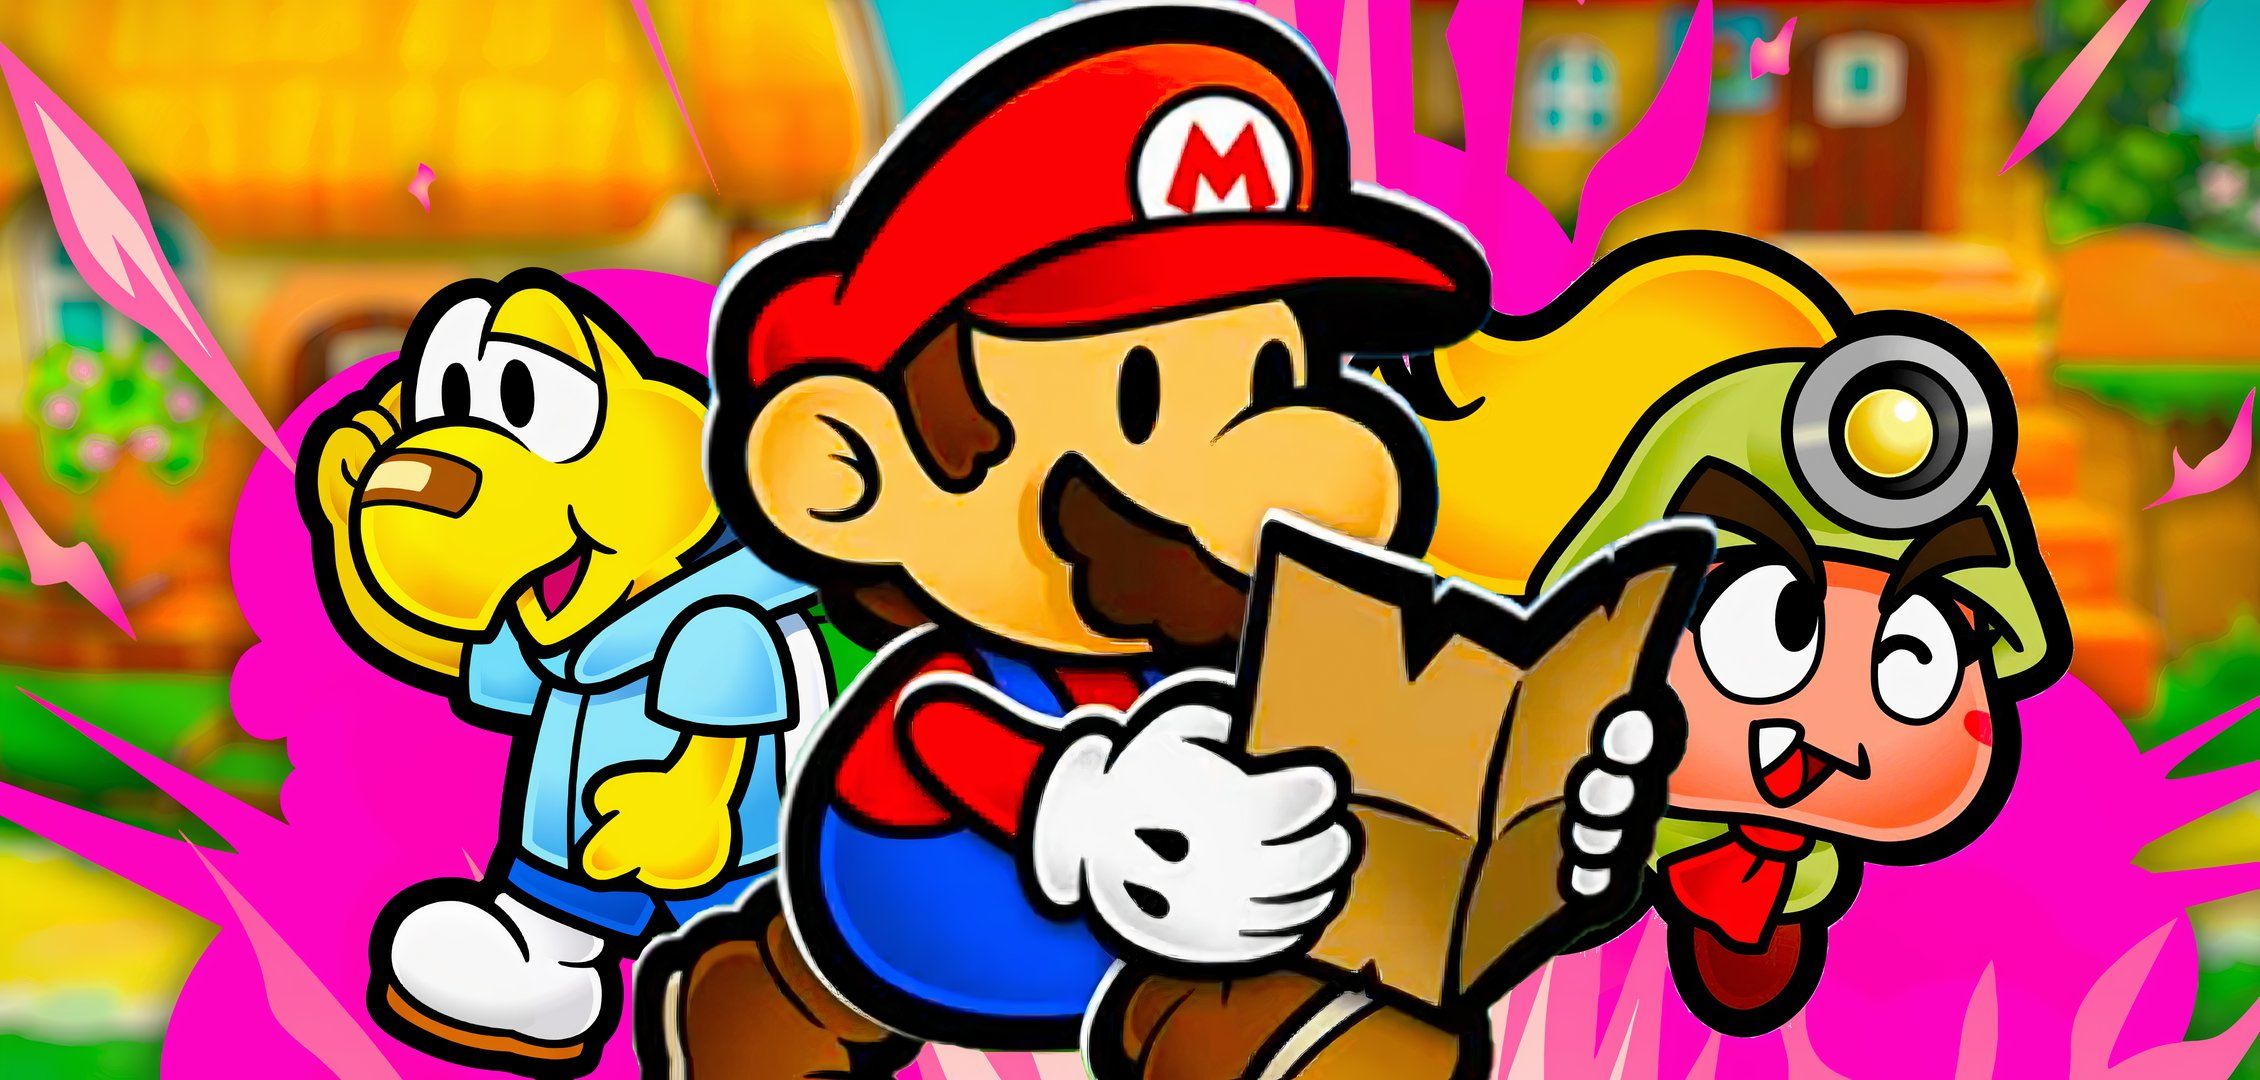 Mario with other characters from Paper Mario The Thousand-Year Door.